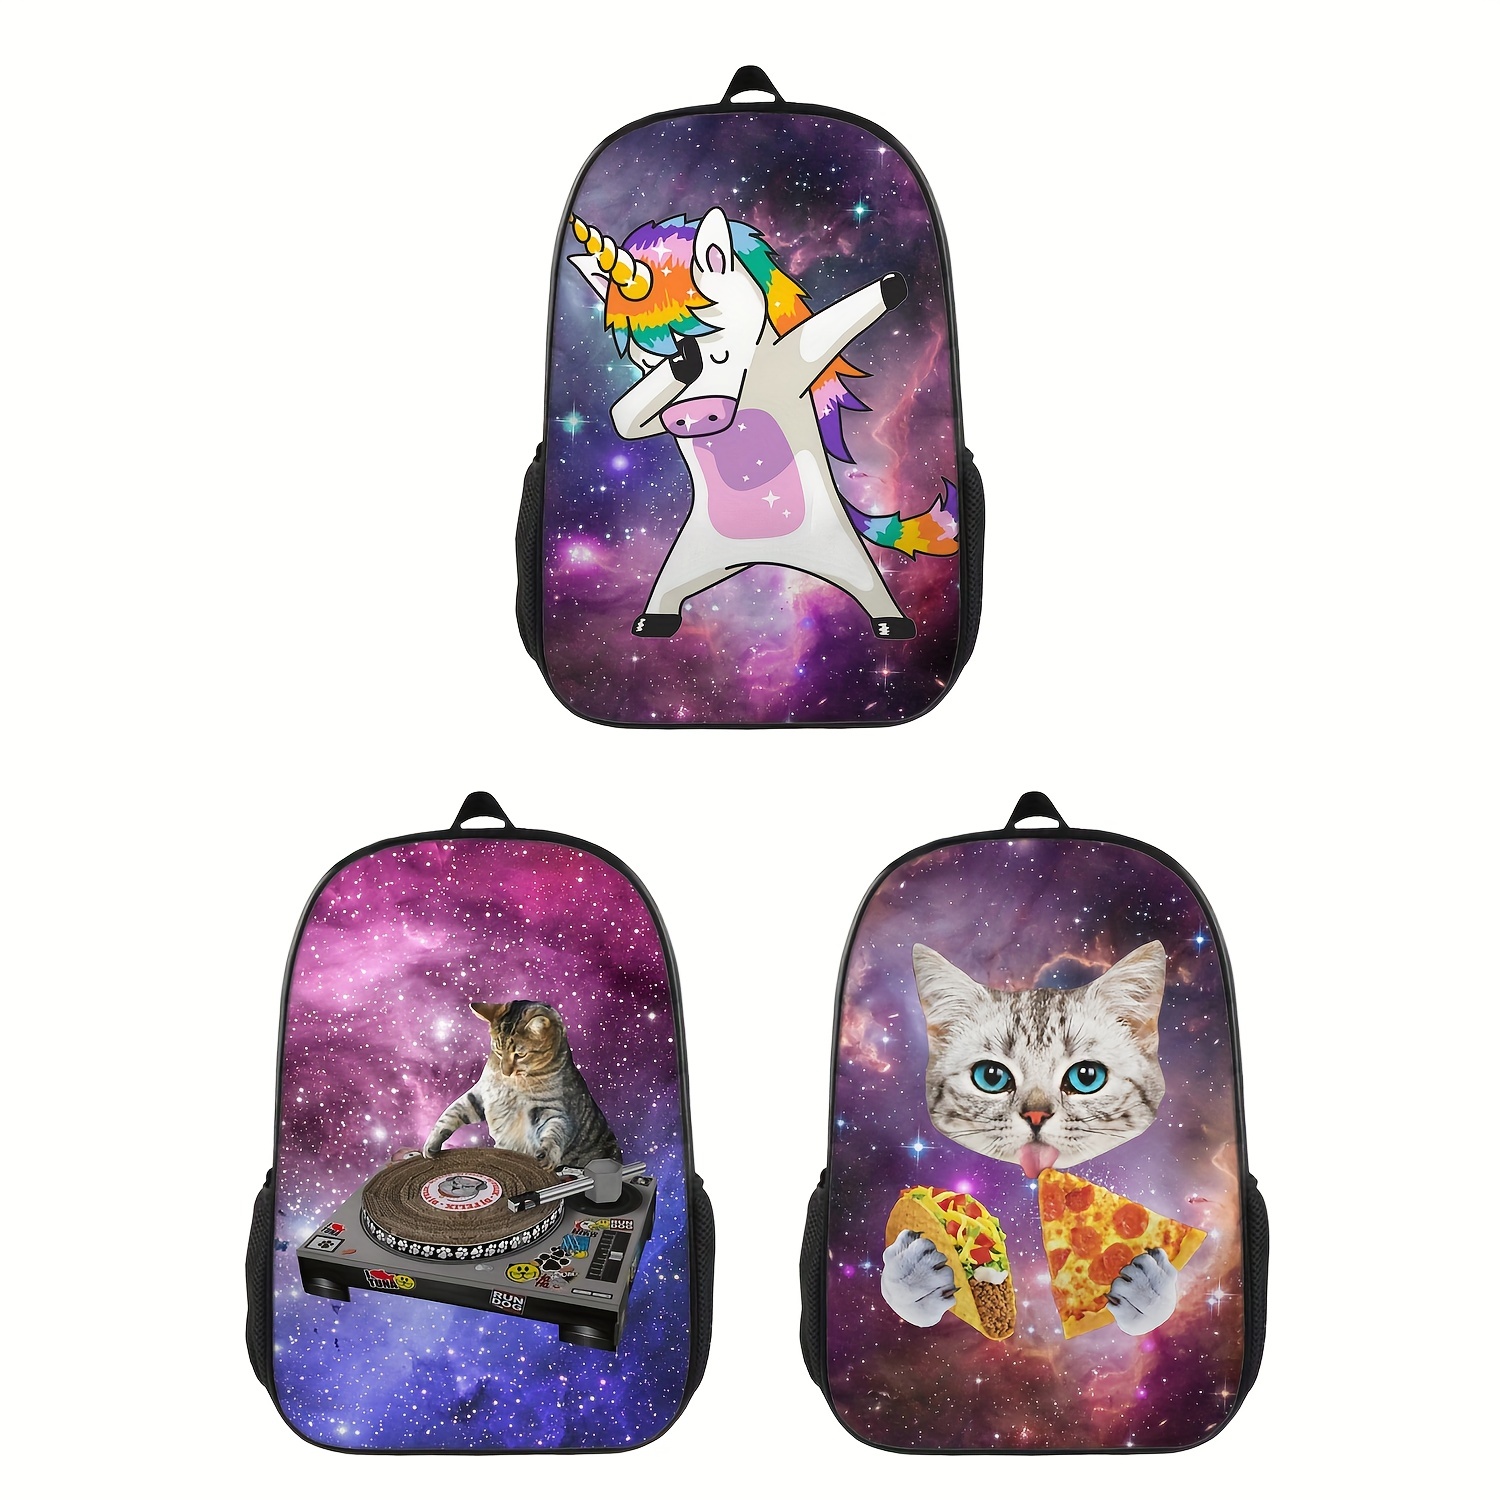 Galaxy Backpack for Kids and Adults / Galaxy Laptop Backpack / 